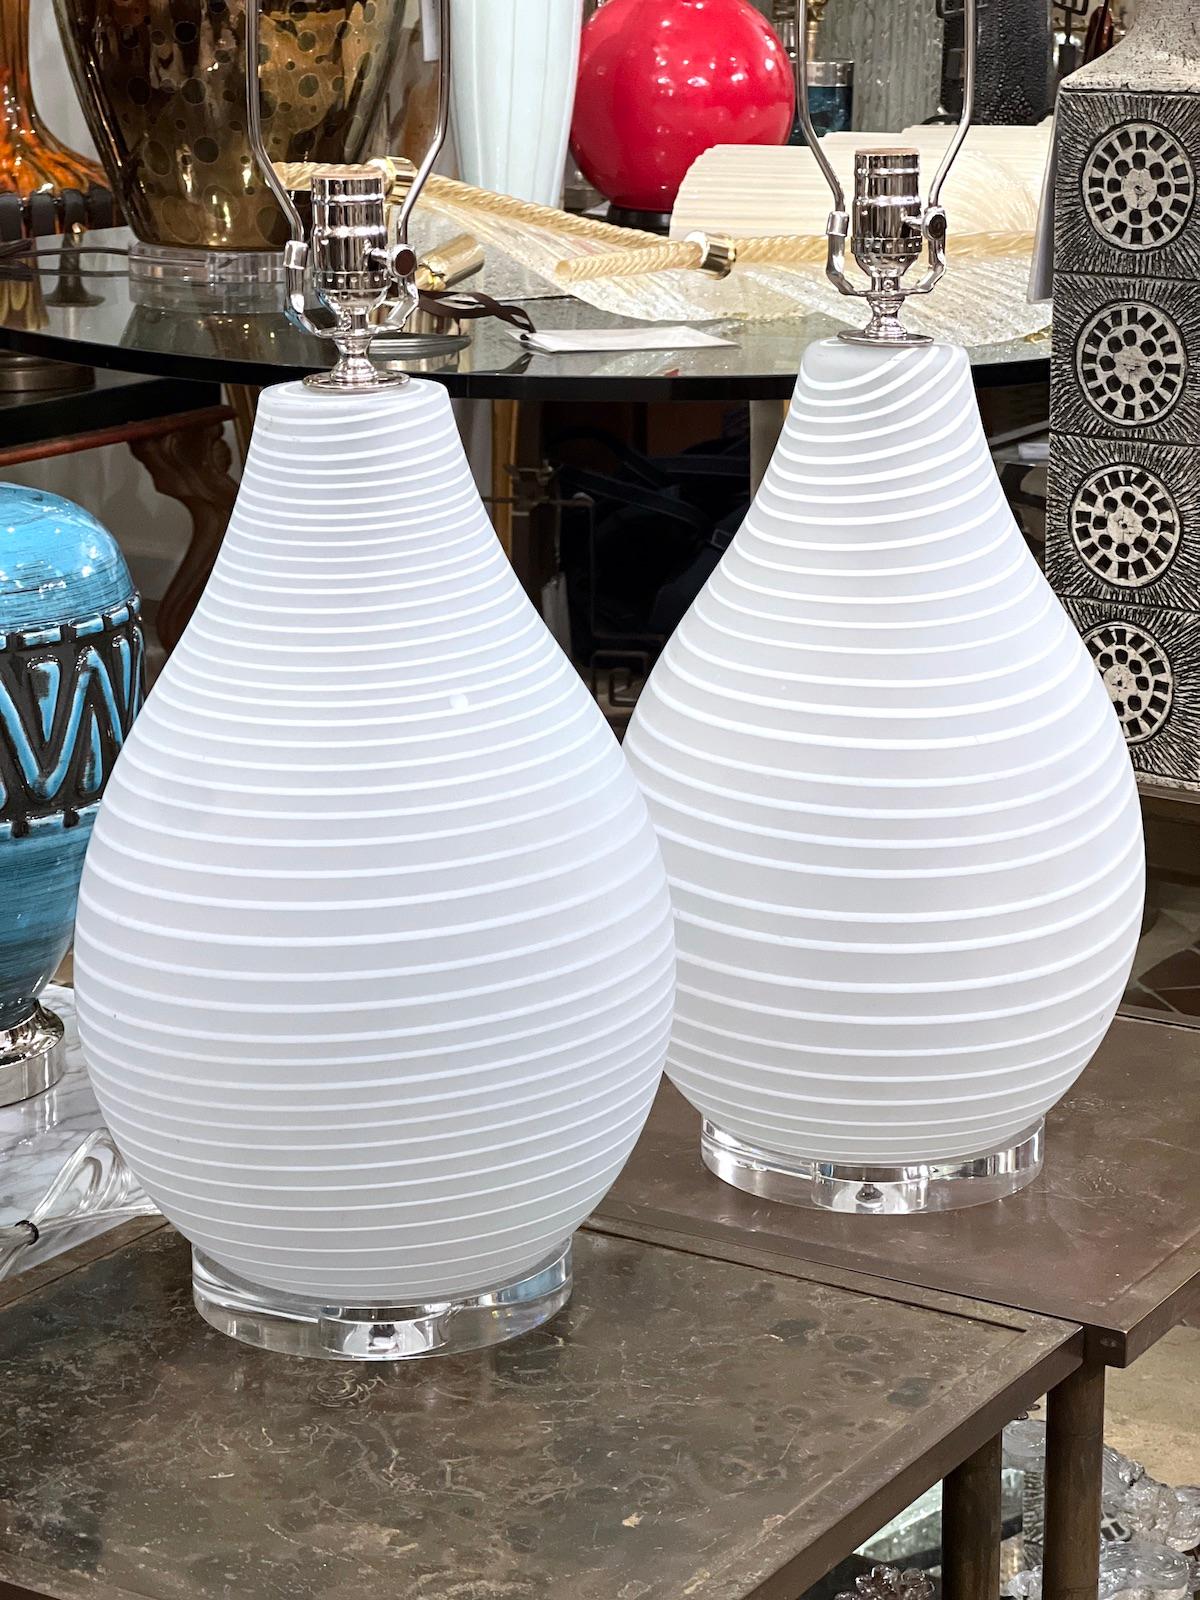 Pair of circa 1960's Italian blown glass lamps with Lucite bases.

Measurements:
Height of body: 17